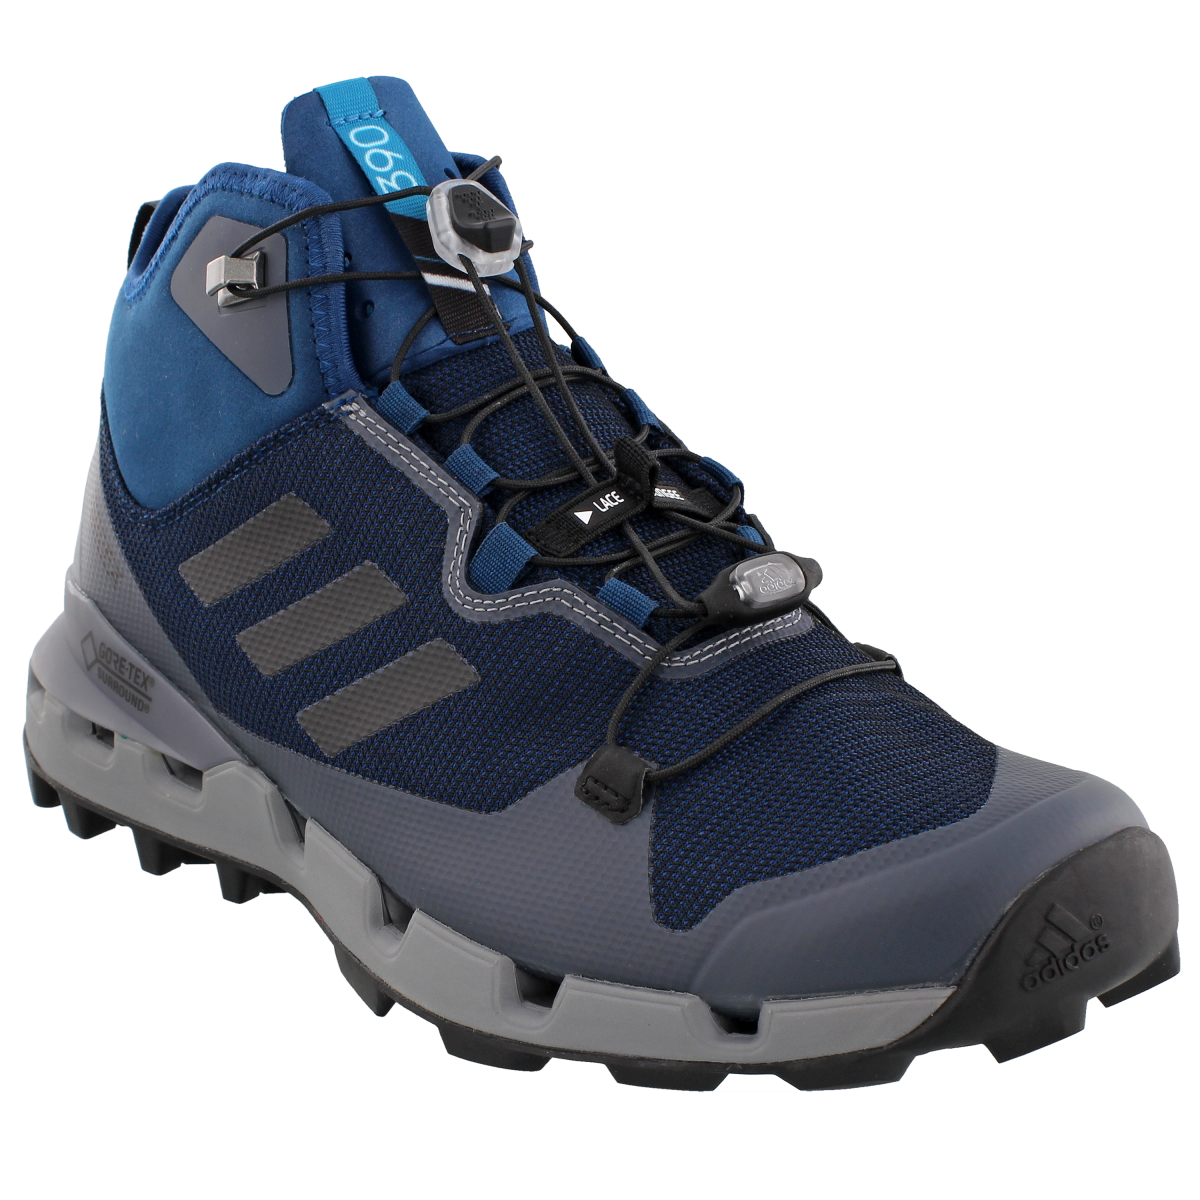 5 Hiking Boots You Can Wear On or Off the Trail - Men's Journal